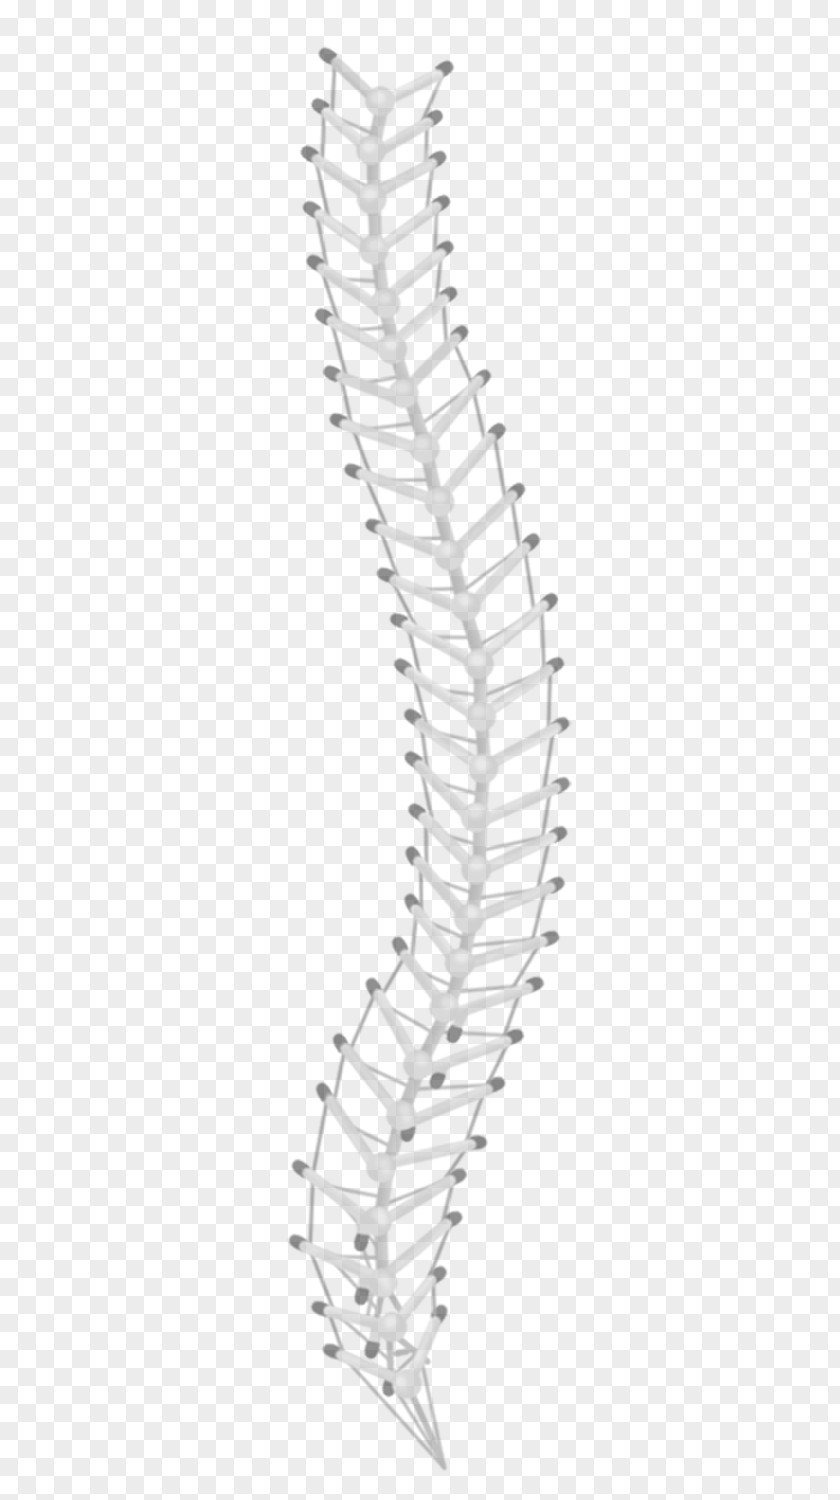 Acupuncture Picture Of Meridians Point Organism Line Art PNG